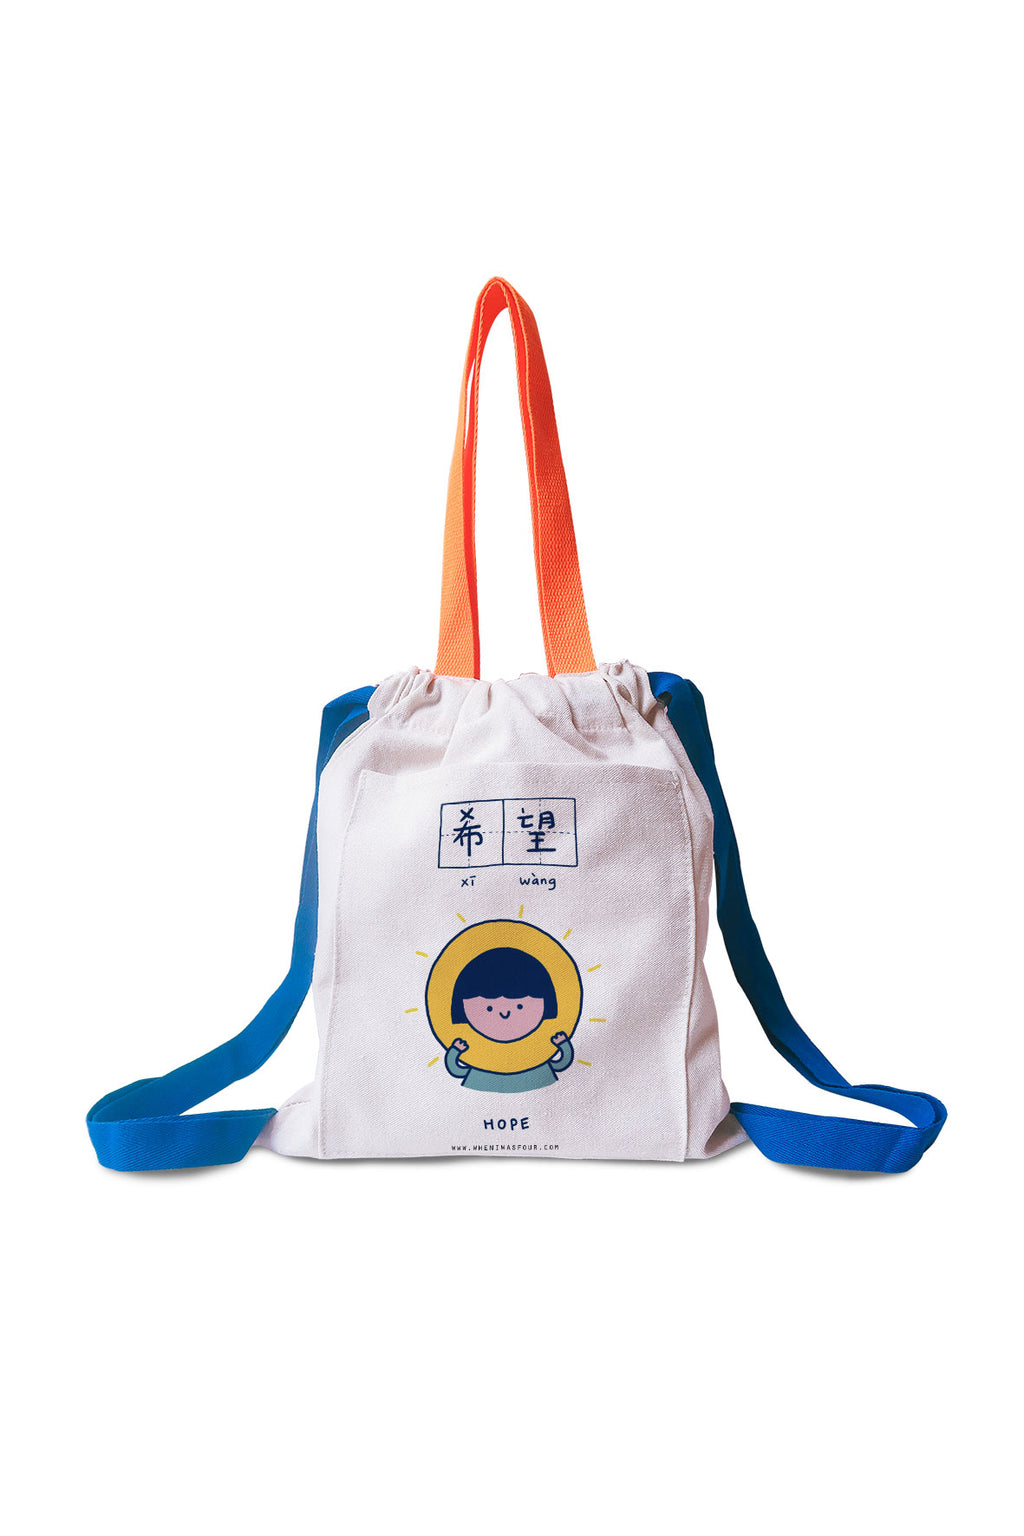 Hope Kids Backpack - Backpack by wheniwasfour | 小时候, Singapore local artist online gift store